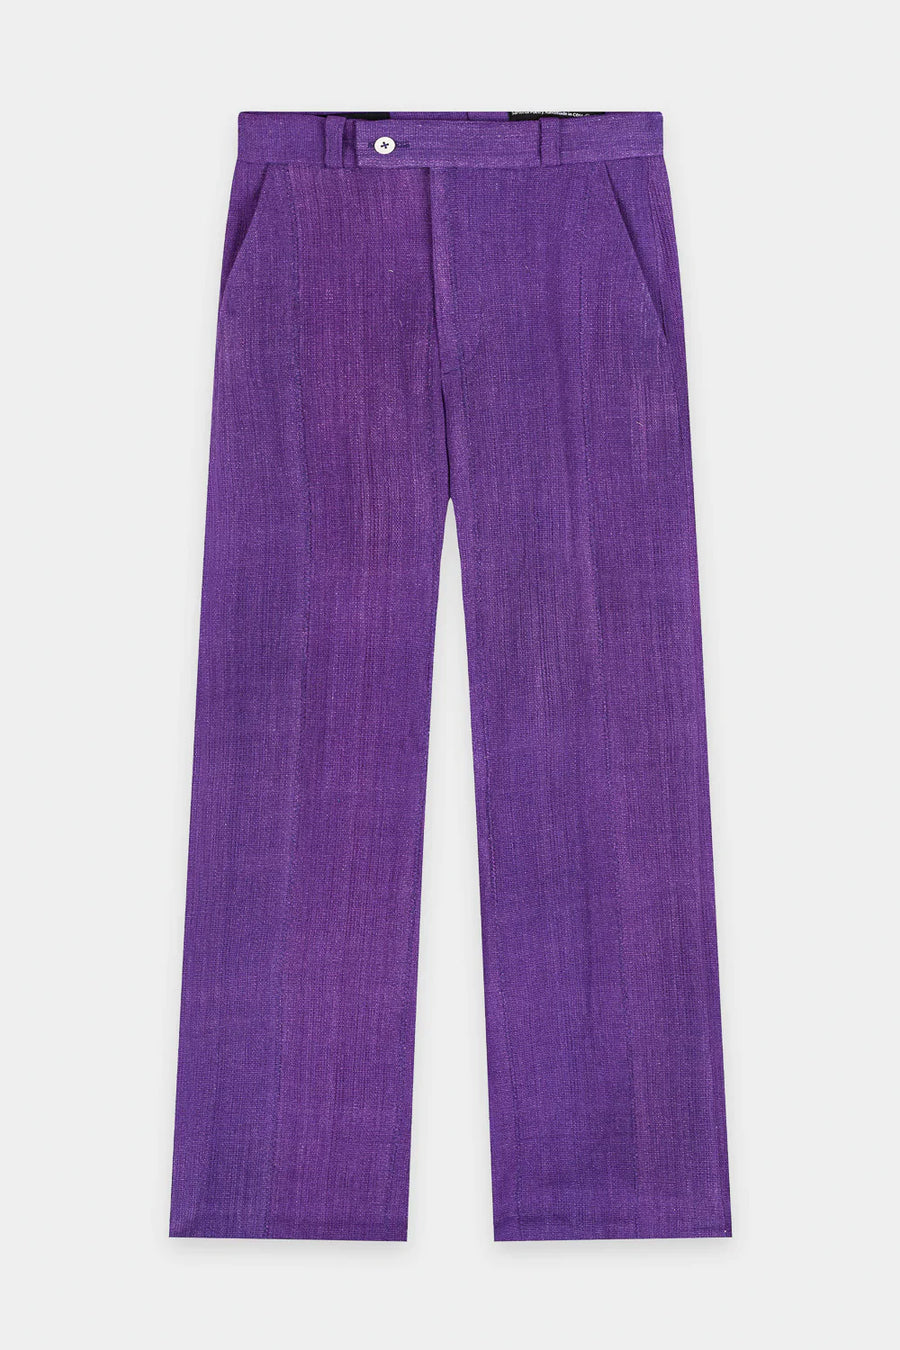 Fela V Tailor Fitted Straight Cut Pant - Purple